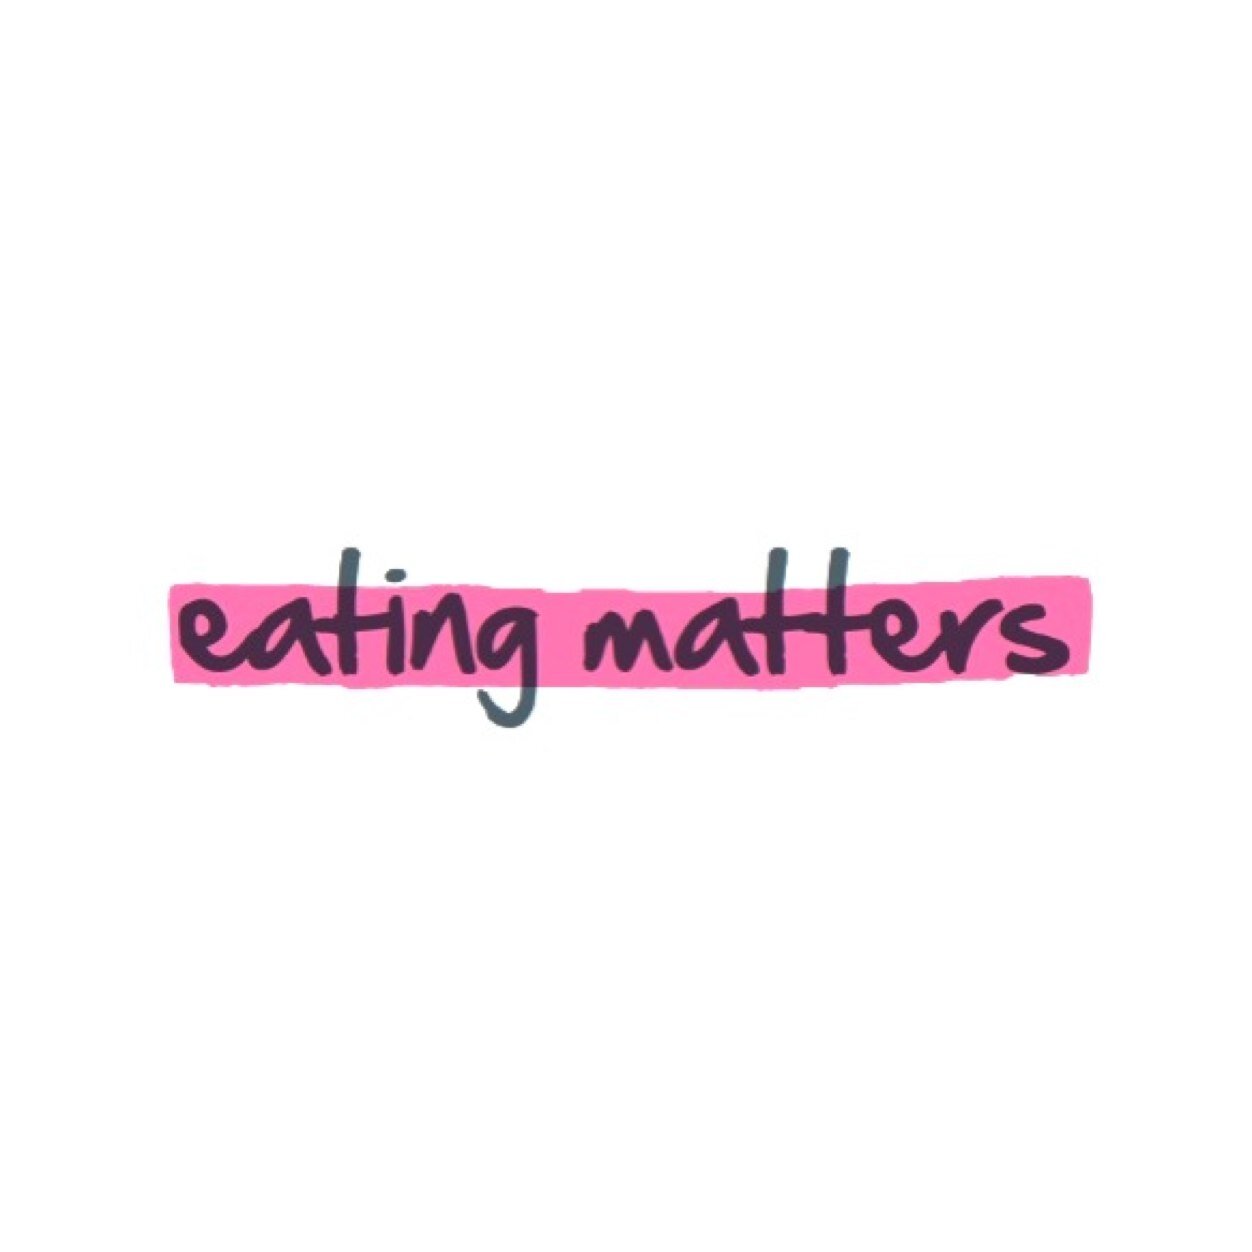 We are a UK charity offering counselling to young people and adults with mild to moderate eating disorders in Norfolk.